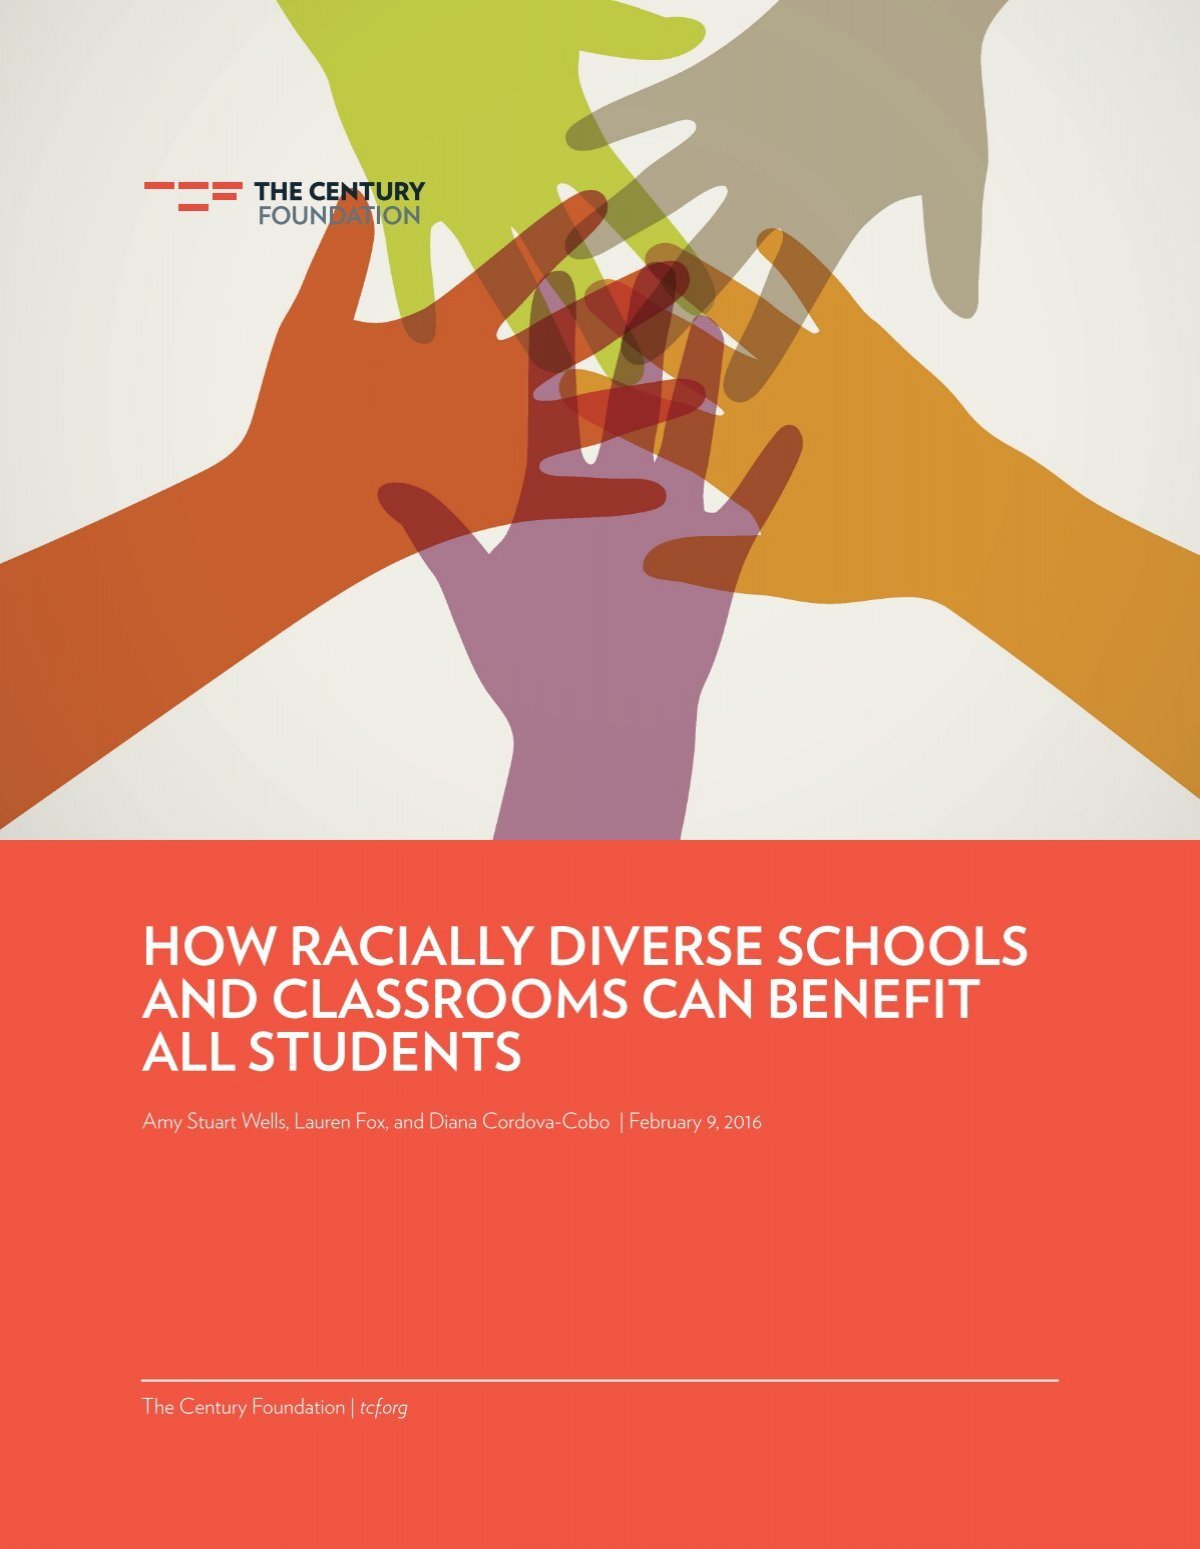 How Racially Diverse Schools And Classrooms Can Benefit All Students